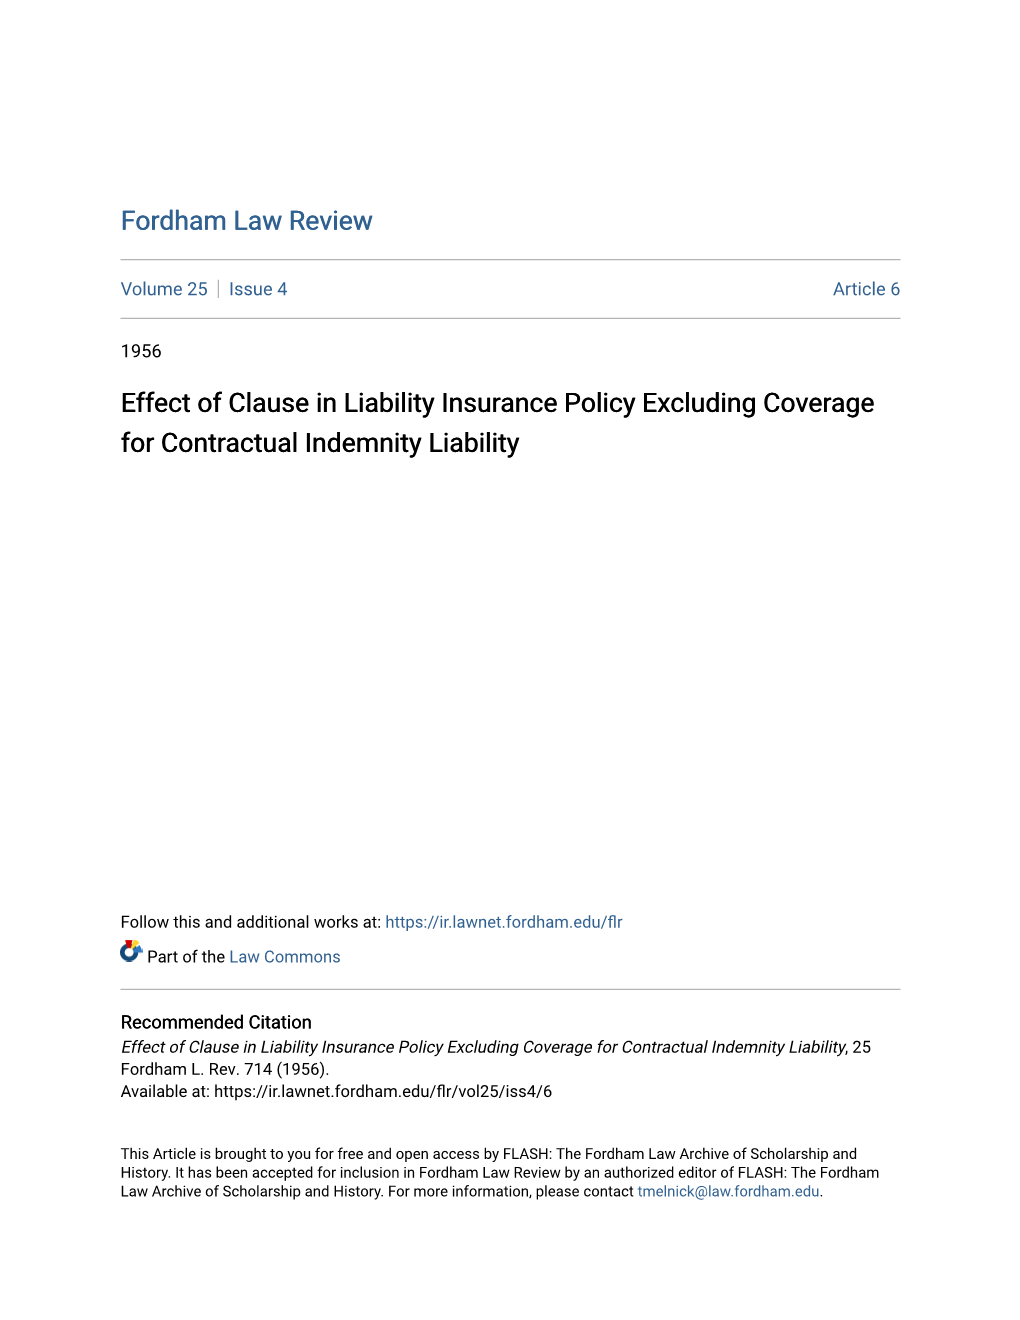 Effect of Clause in Liability Insurance Policy Excluding Coverage for Contractual Indemnity Liability